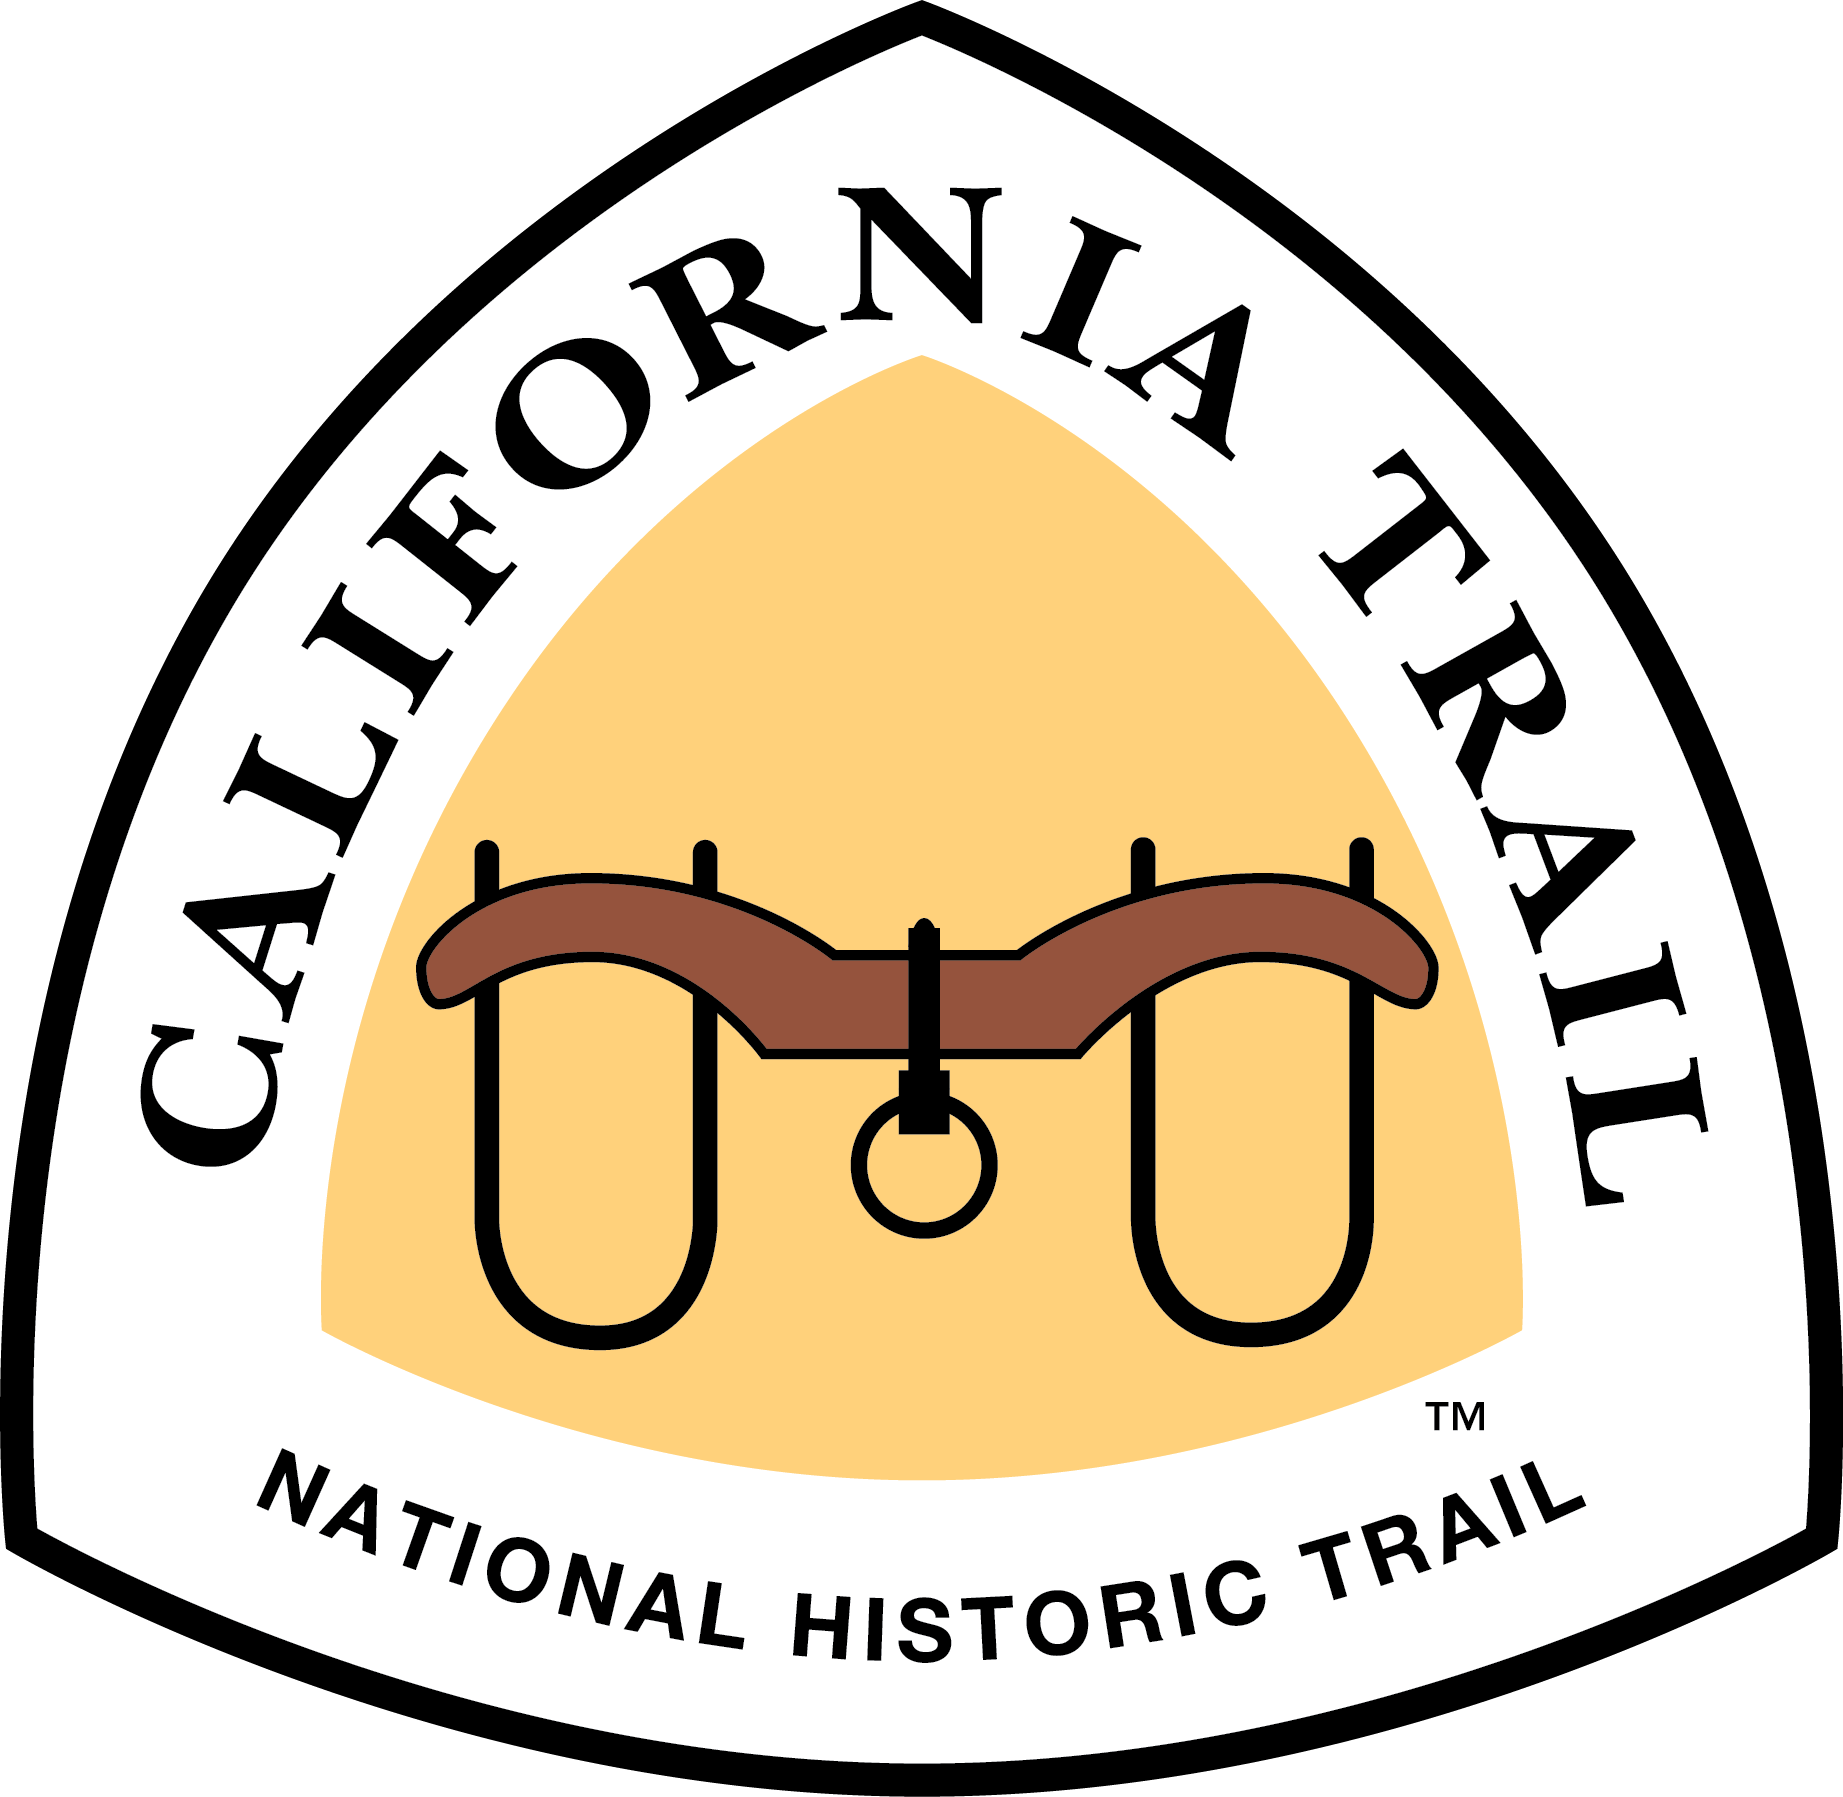 A triangle with "California Trail" and a silhouette of an oxen yoke.